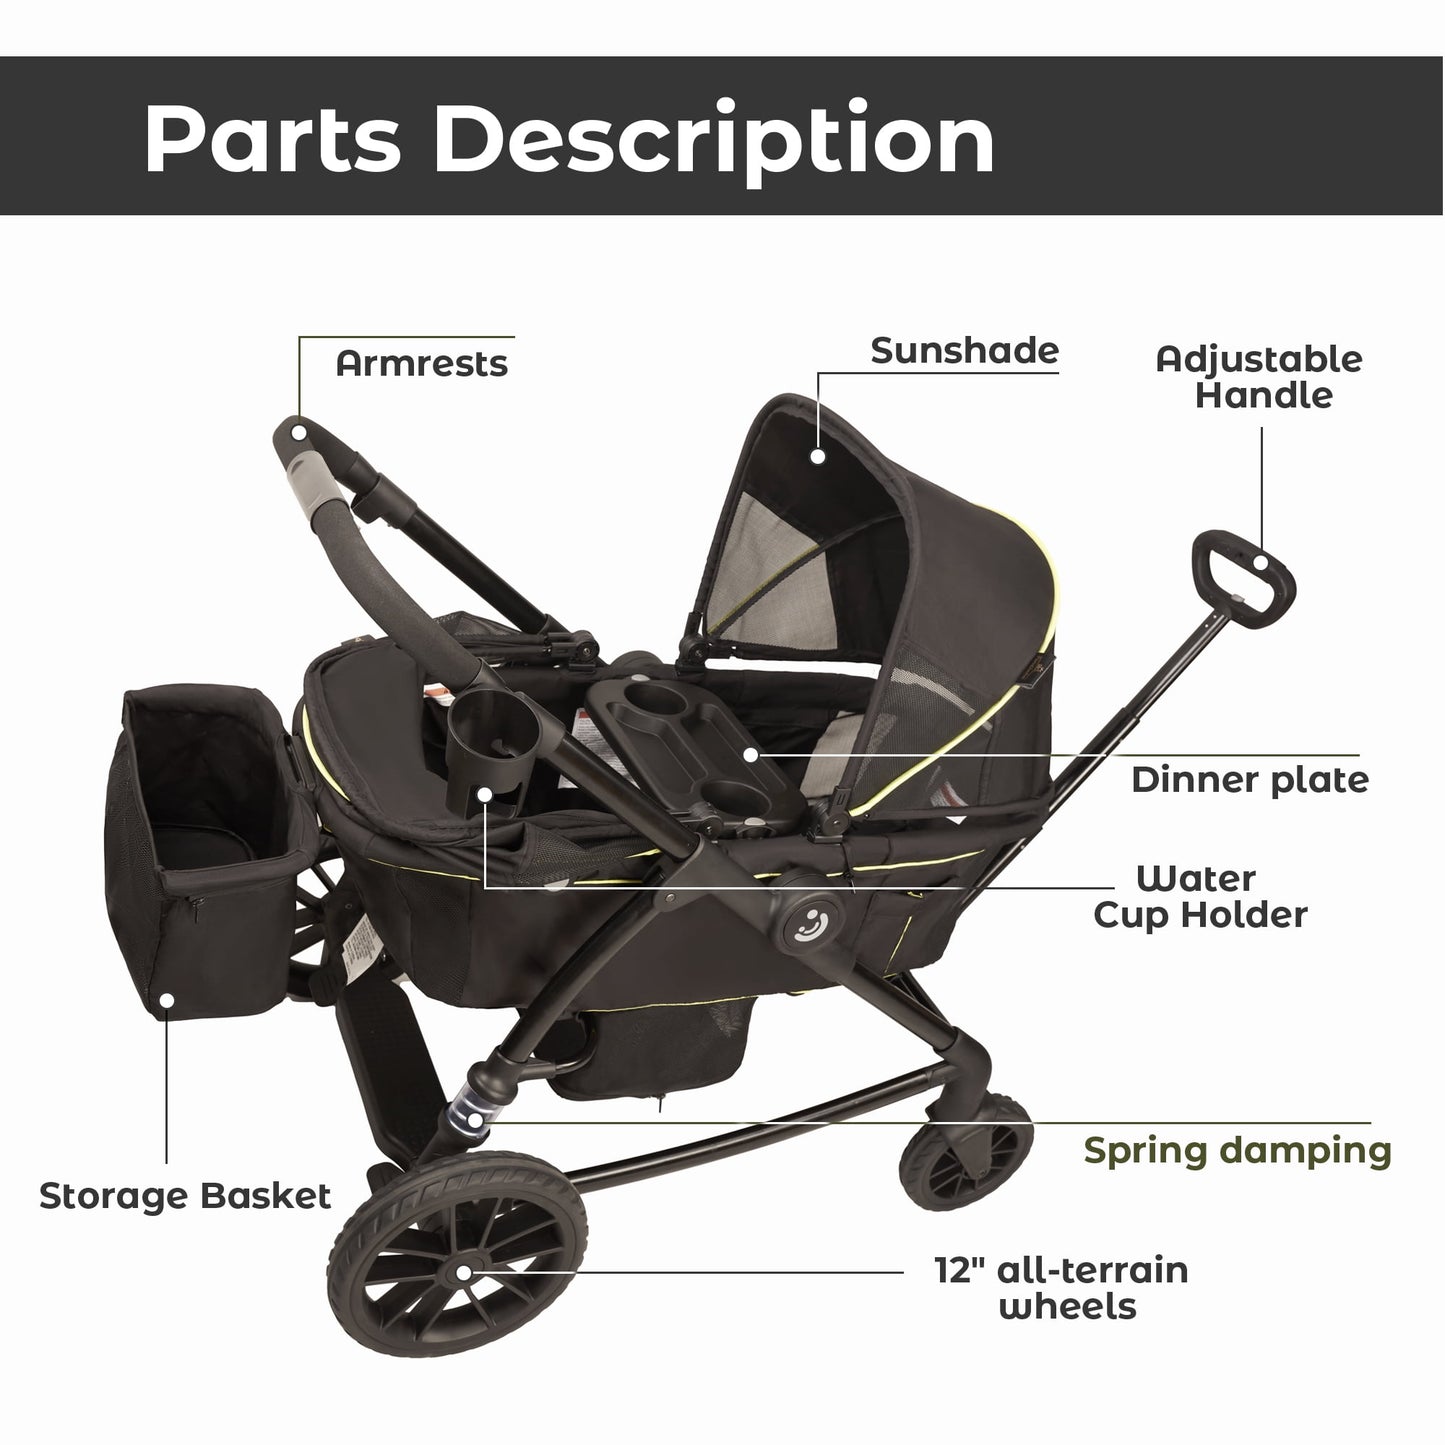 Pamo Babe 2-Seat Wagon Stroller Folding Baby Stroller with Adjustable Canopy